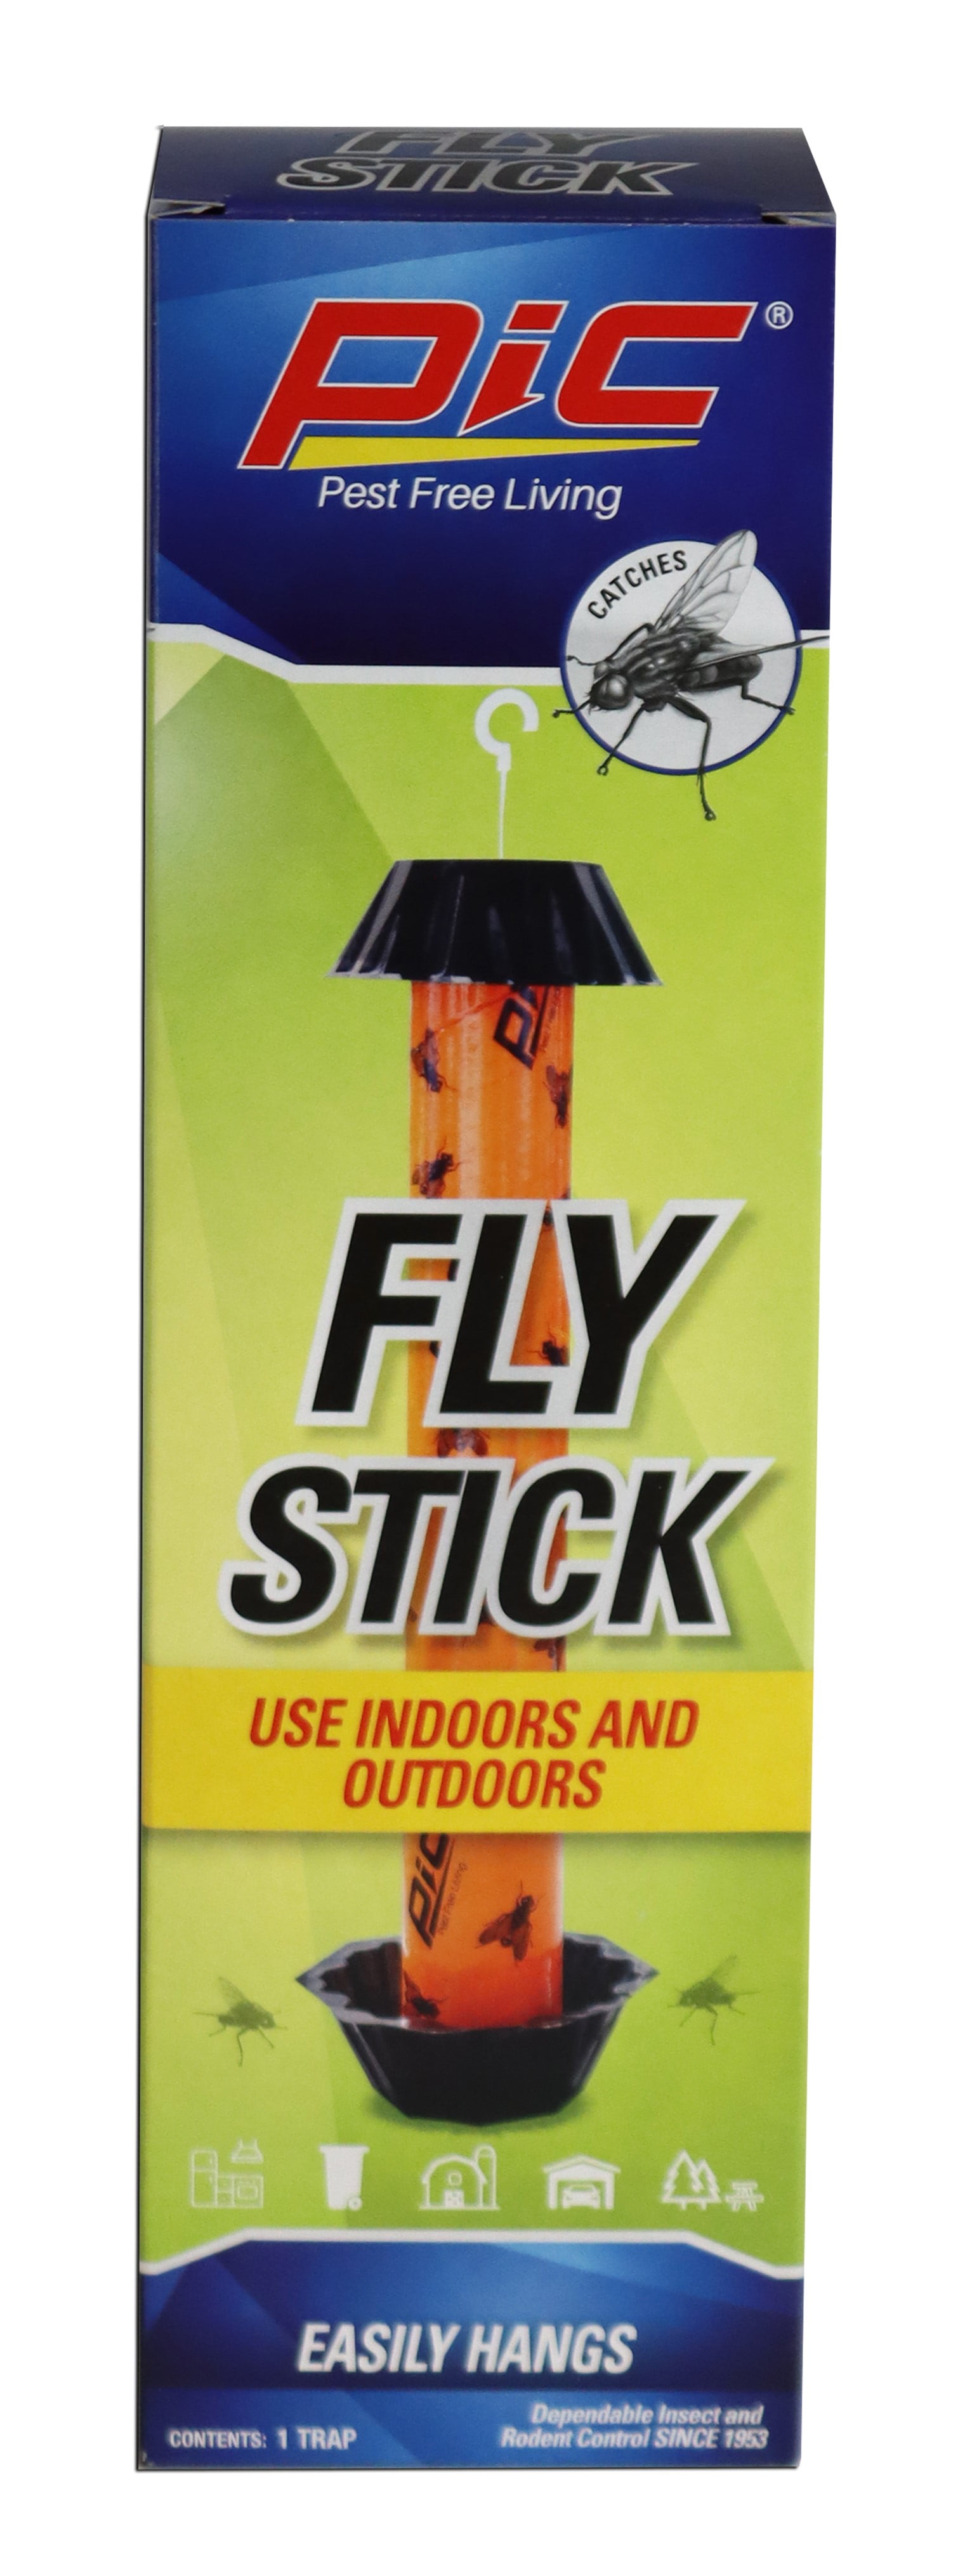 PIC Jumbo Fly Stick with Gold Lure for Indoor or Outdoor Use - Traps Flies  - Walmart.com